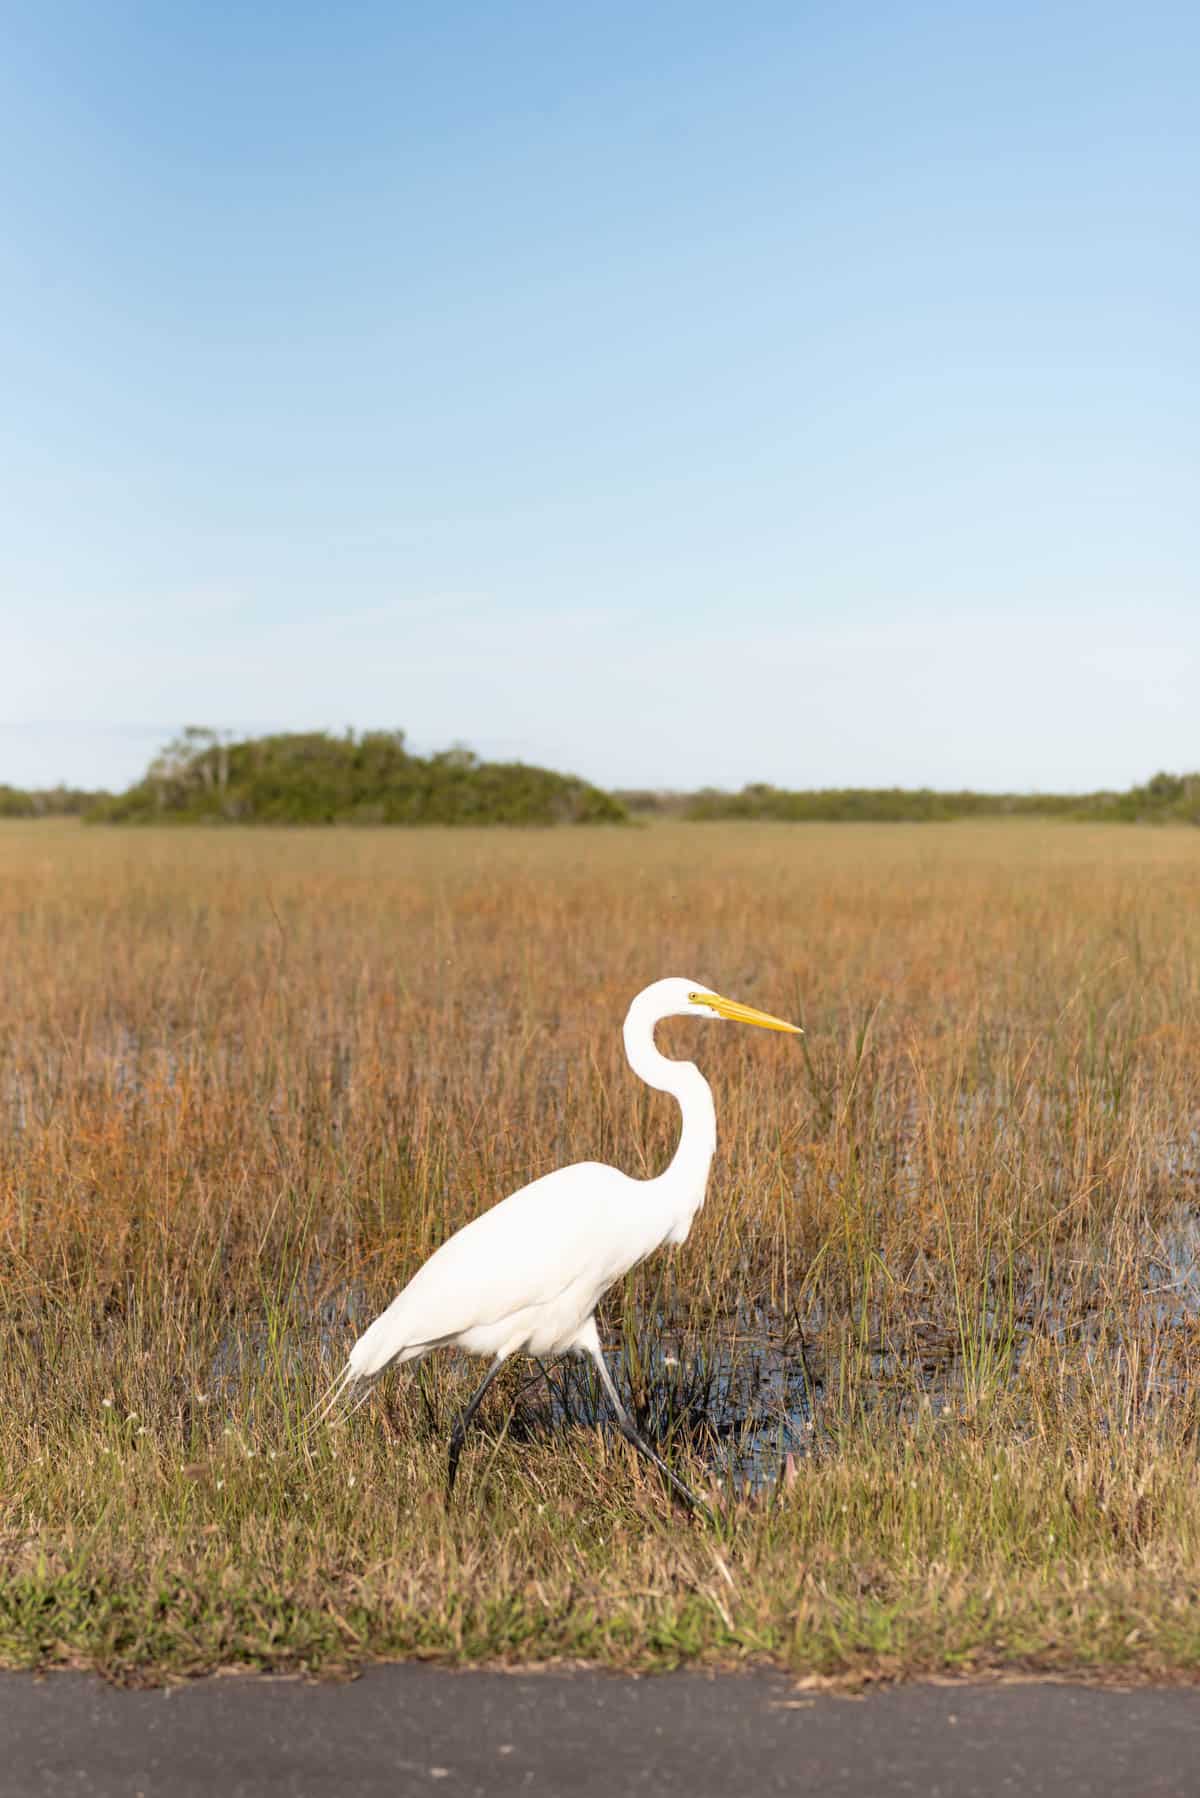 An image of a great egret in Everglades National Park.